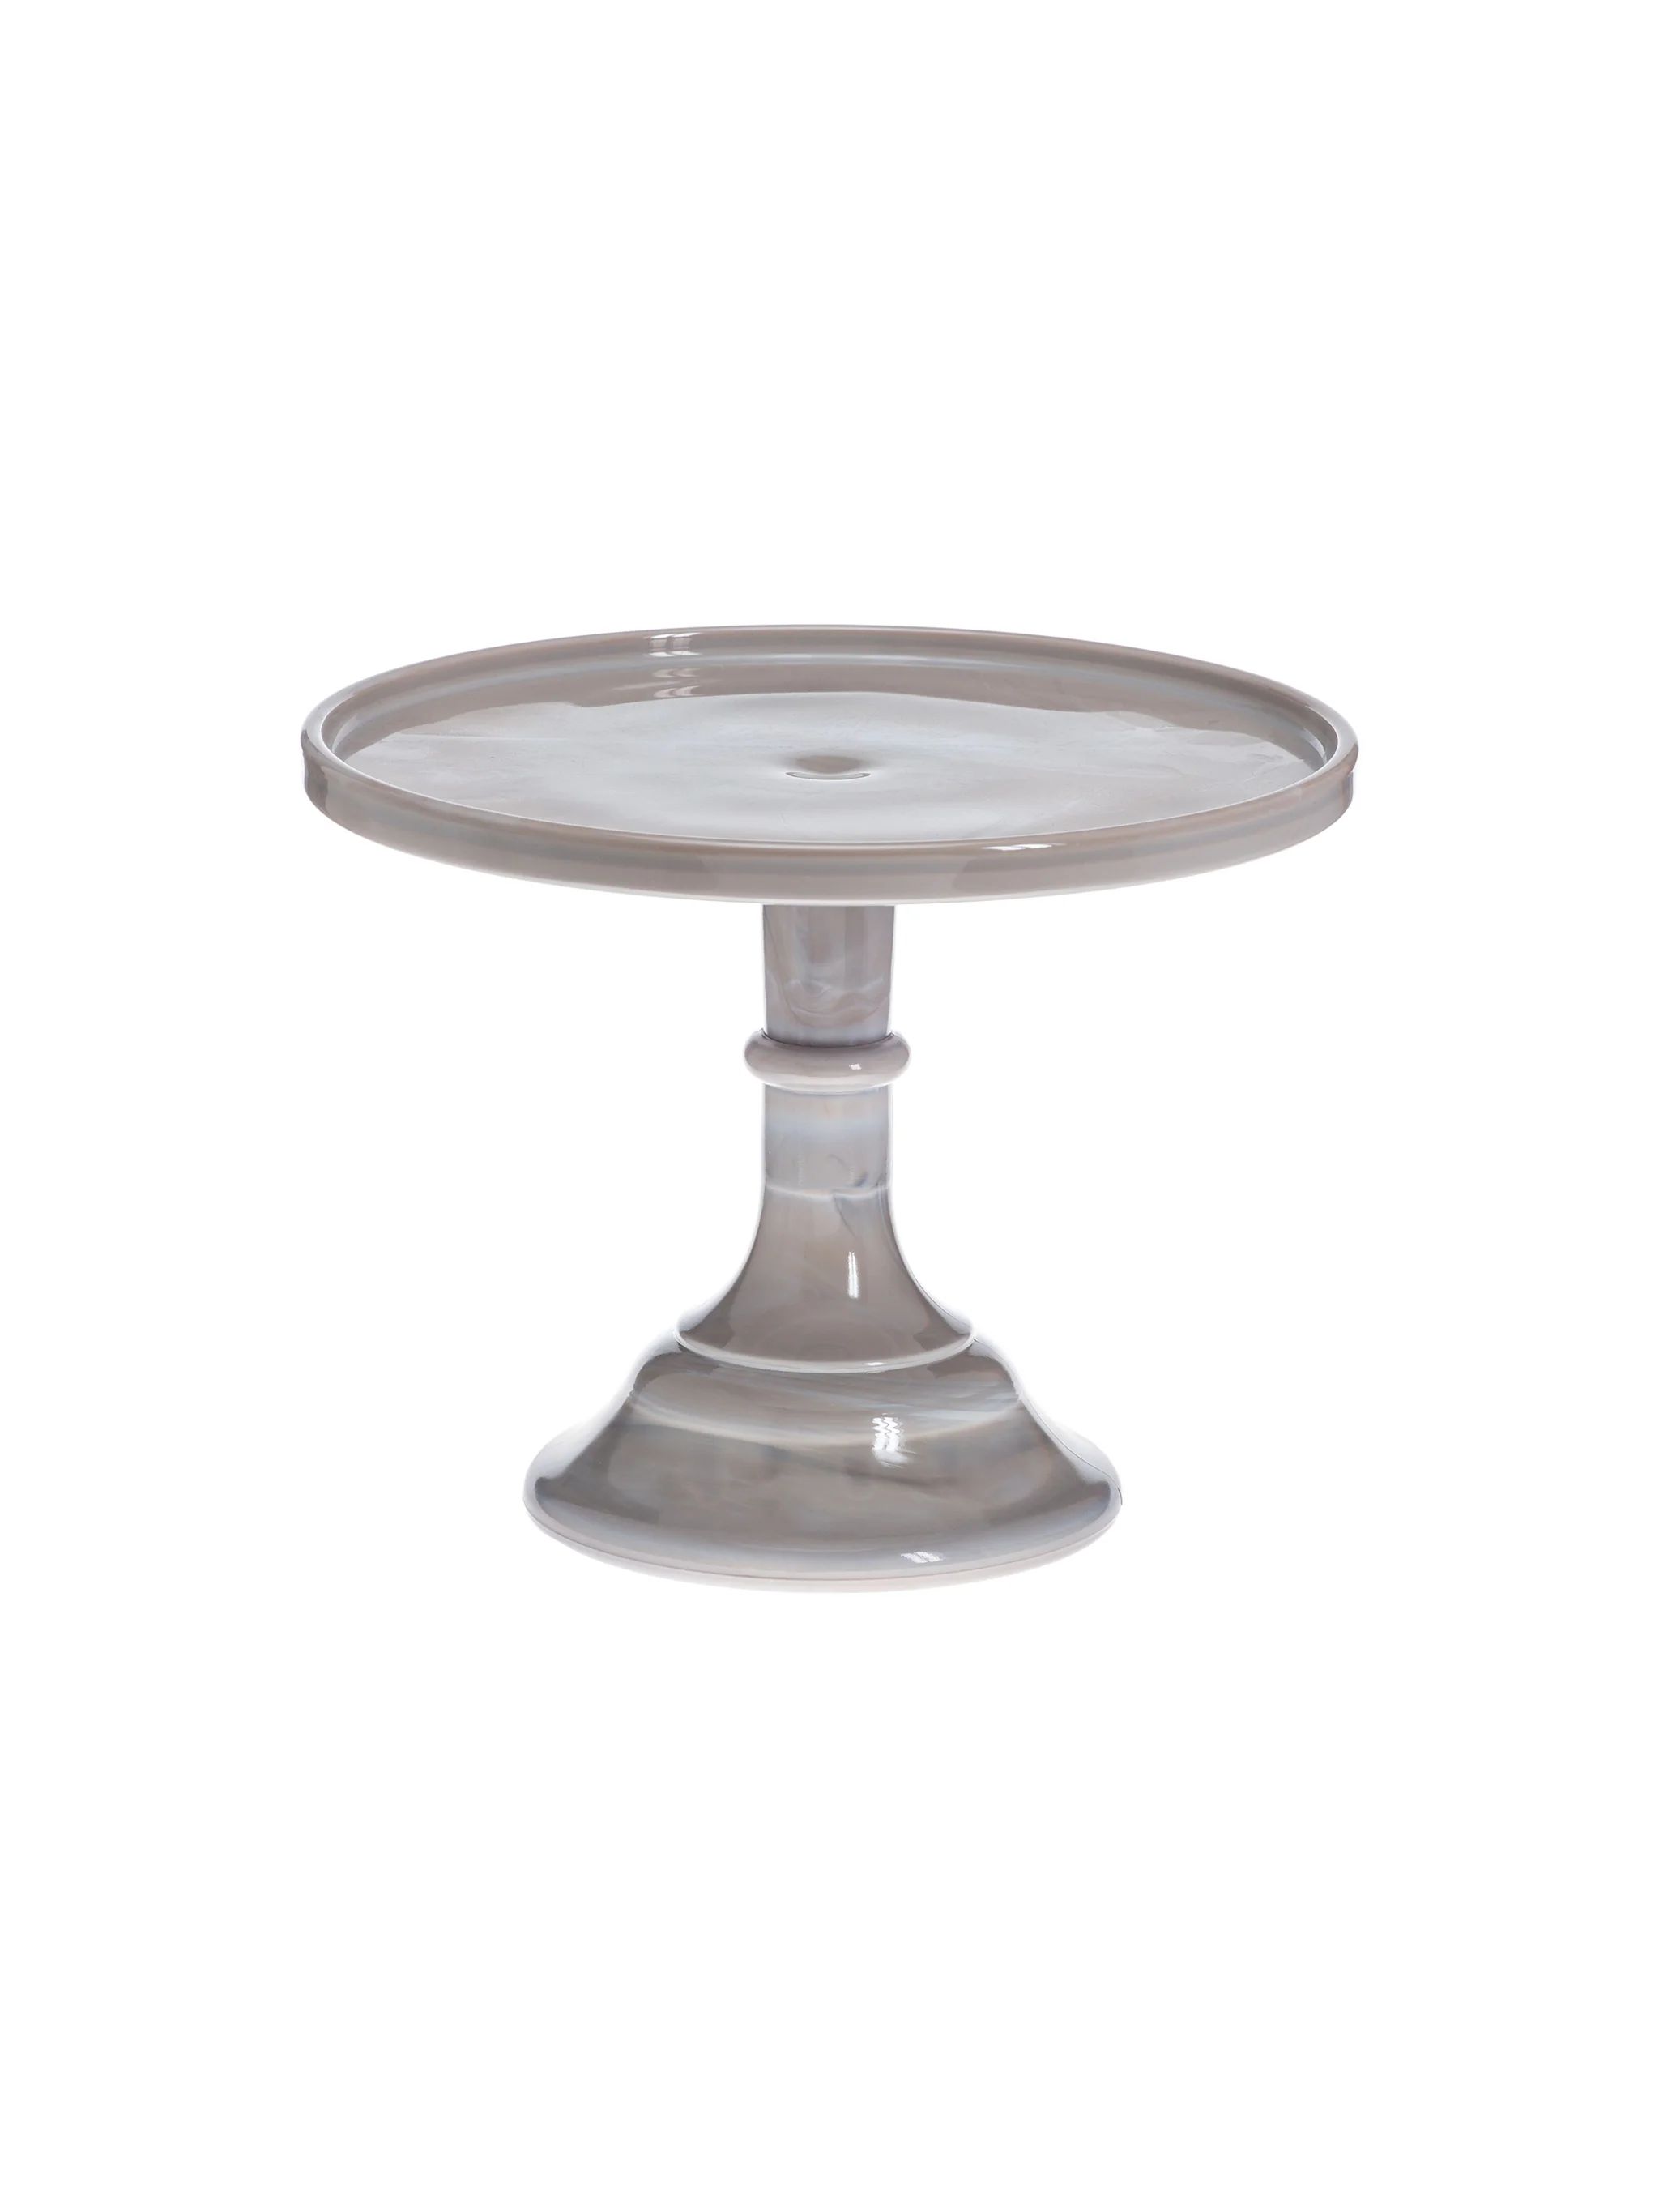 10 Inch D Cake Stand | Weston Table